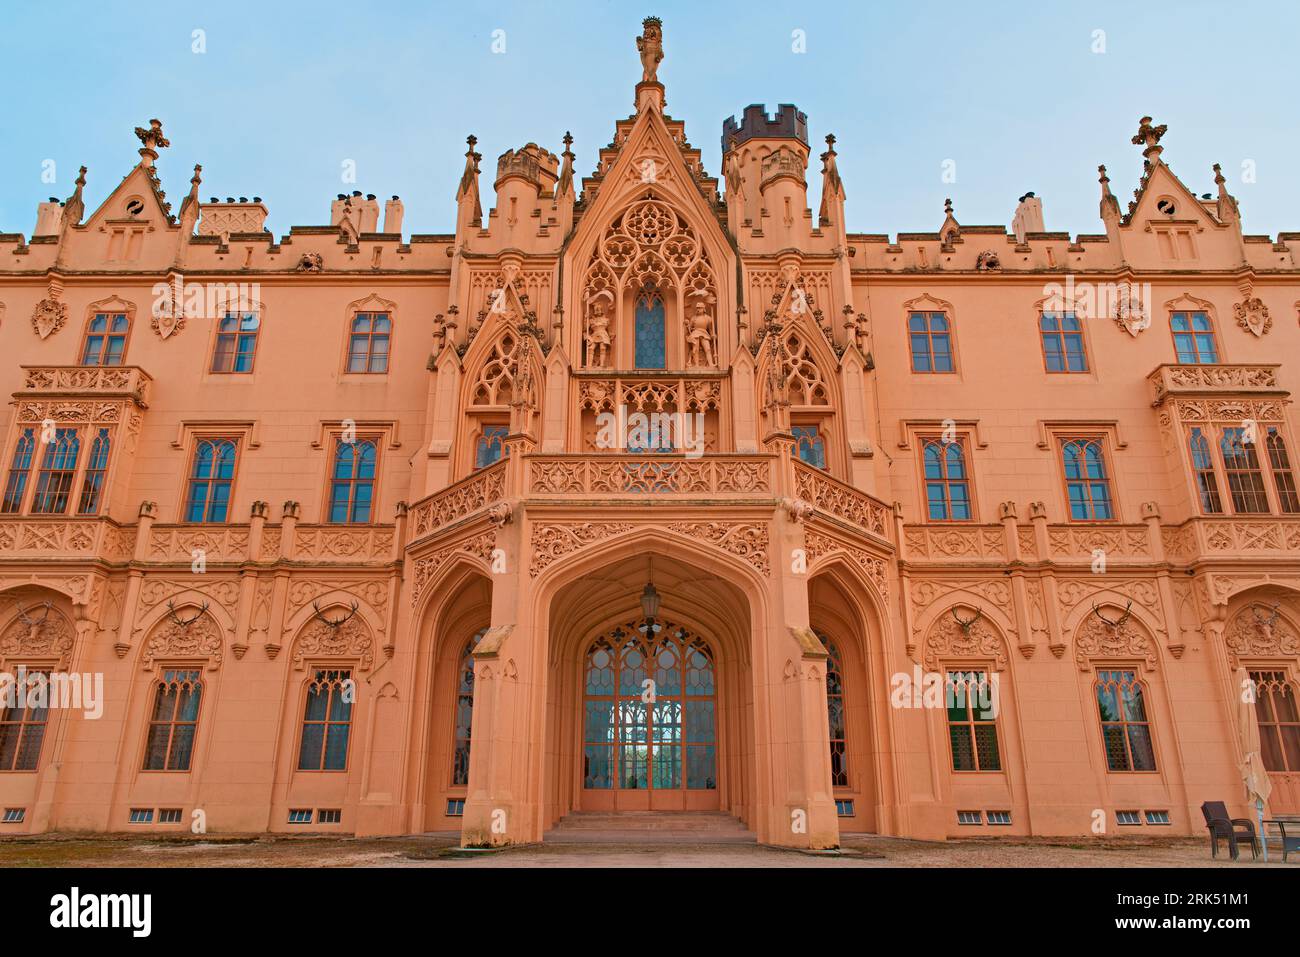 A large Lednice Castle, South Moravia, Czech Republic with an abundance of windows and entryways Stock Photo